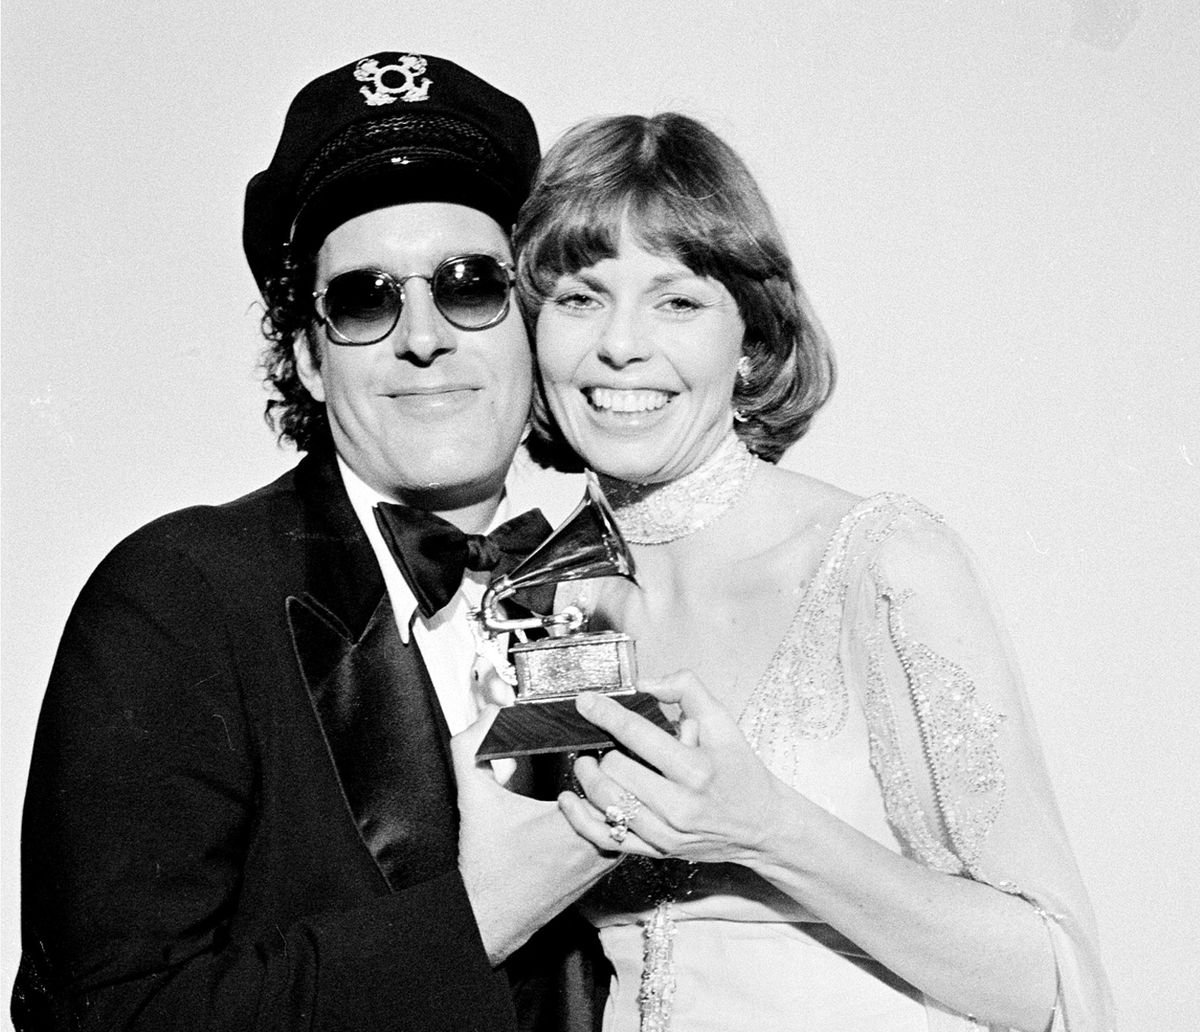 In this Feb. 28, 1976,  photo, Daryl Dragon and his wife Toni Tennille, of the Captain & Tennille, hold the Grammy award they won for record of the year for “Love Will Keep Us Together,” at the Grammy Awards ceremony in Los Angeles. Dragon died early Wednesday, Jan. 2, 2019, at a hospice in Prescott, Ariz. Spokesman Harlan Boll said he was 76 and died of renal failure. His former wife and musical partner, Toni Tennille, was by his side. (Associated Press)